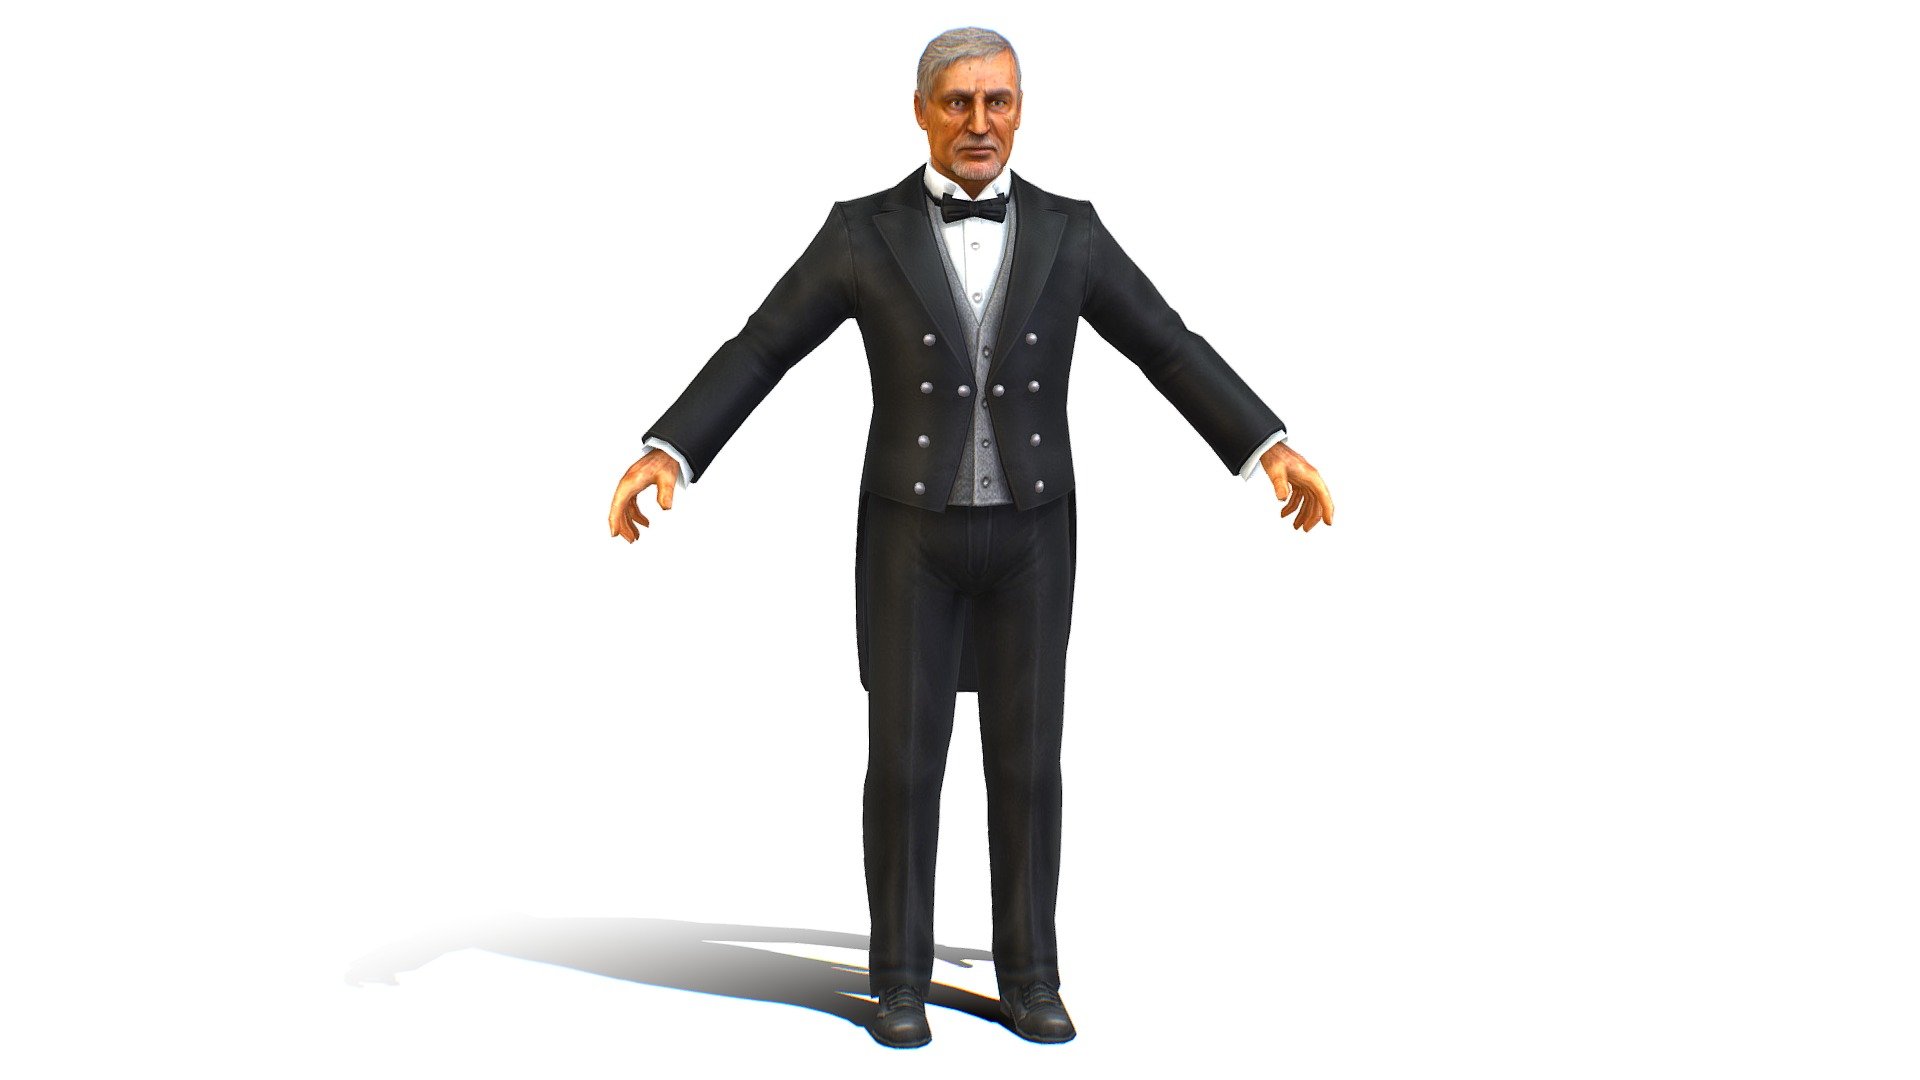 Old Man Concierge in Black Suit - 3dsMax file included/ texture 512 color only, head and body 3d model